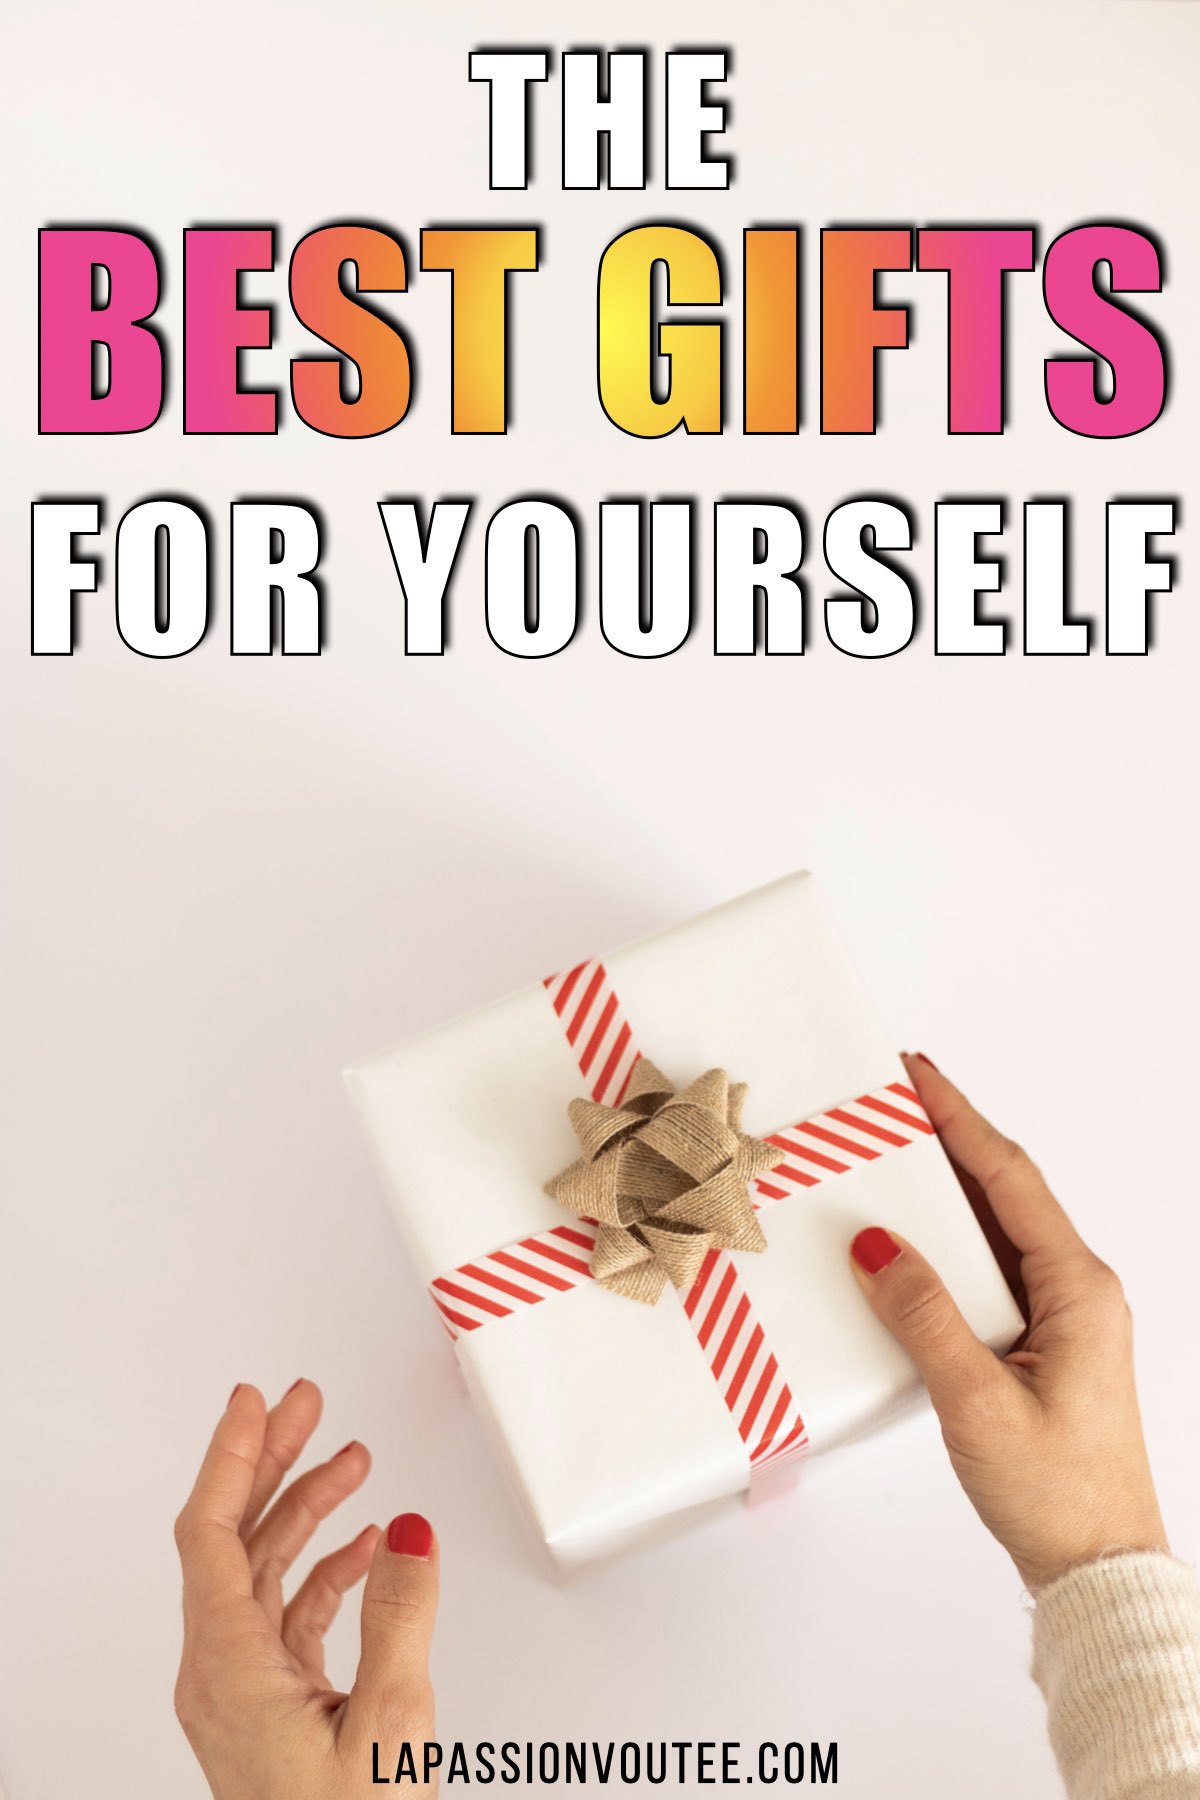 A roundup of the best gifts to treat yourself this season. Fashionistas, beauty lovers, and fitness enthusiasts will find a practical and meaningful gift idea that they'll use for years to come.